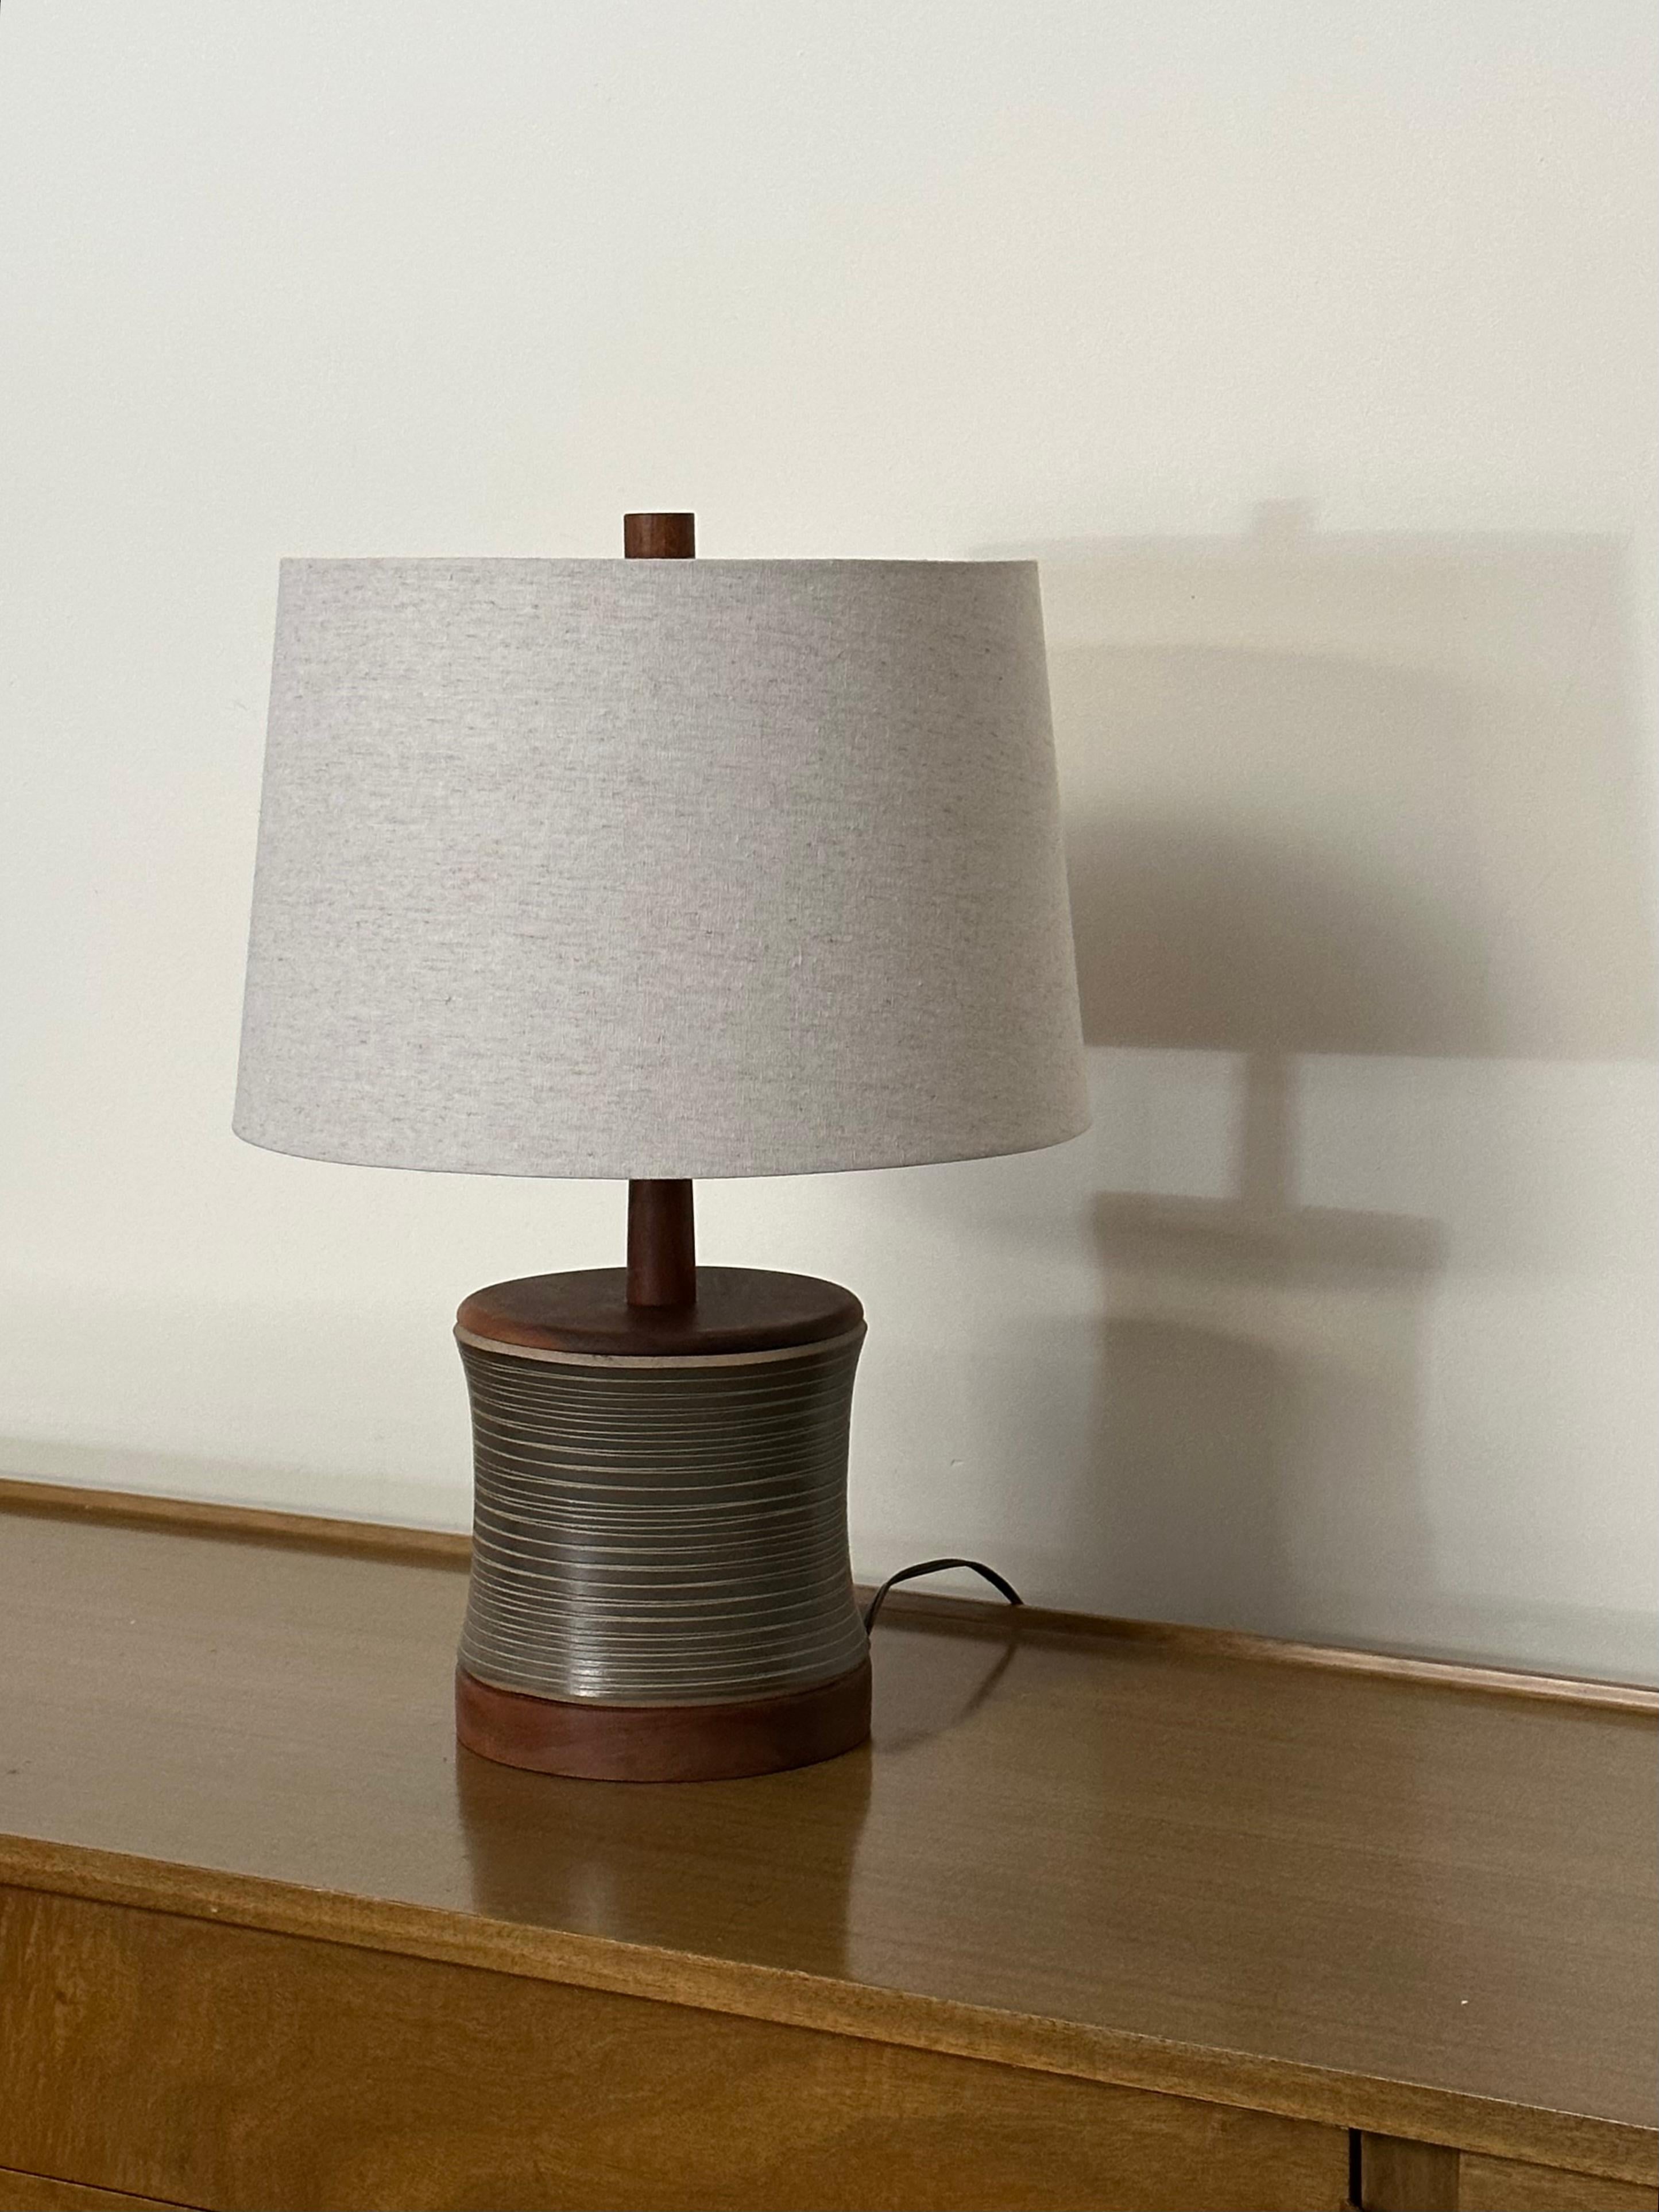 Iconic table lamp designed by the ceramicist duo Jane and Gordon Martz for Marshall Studios. Featuring a walnut disc bottom and top, complete with beautifully glazed ceramic body. An extra long walnut neck completes the lamp.